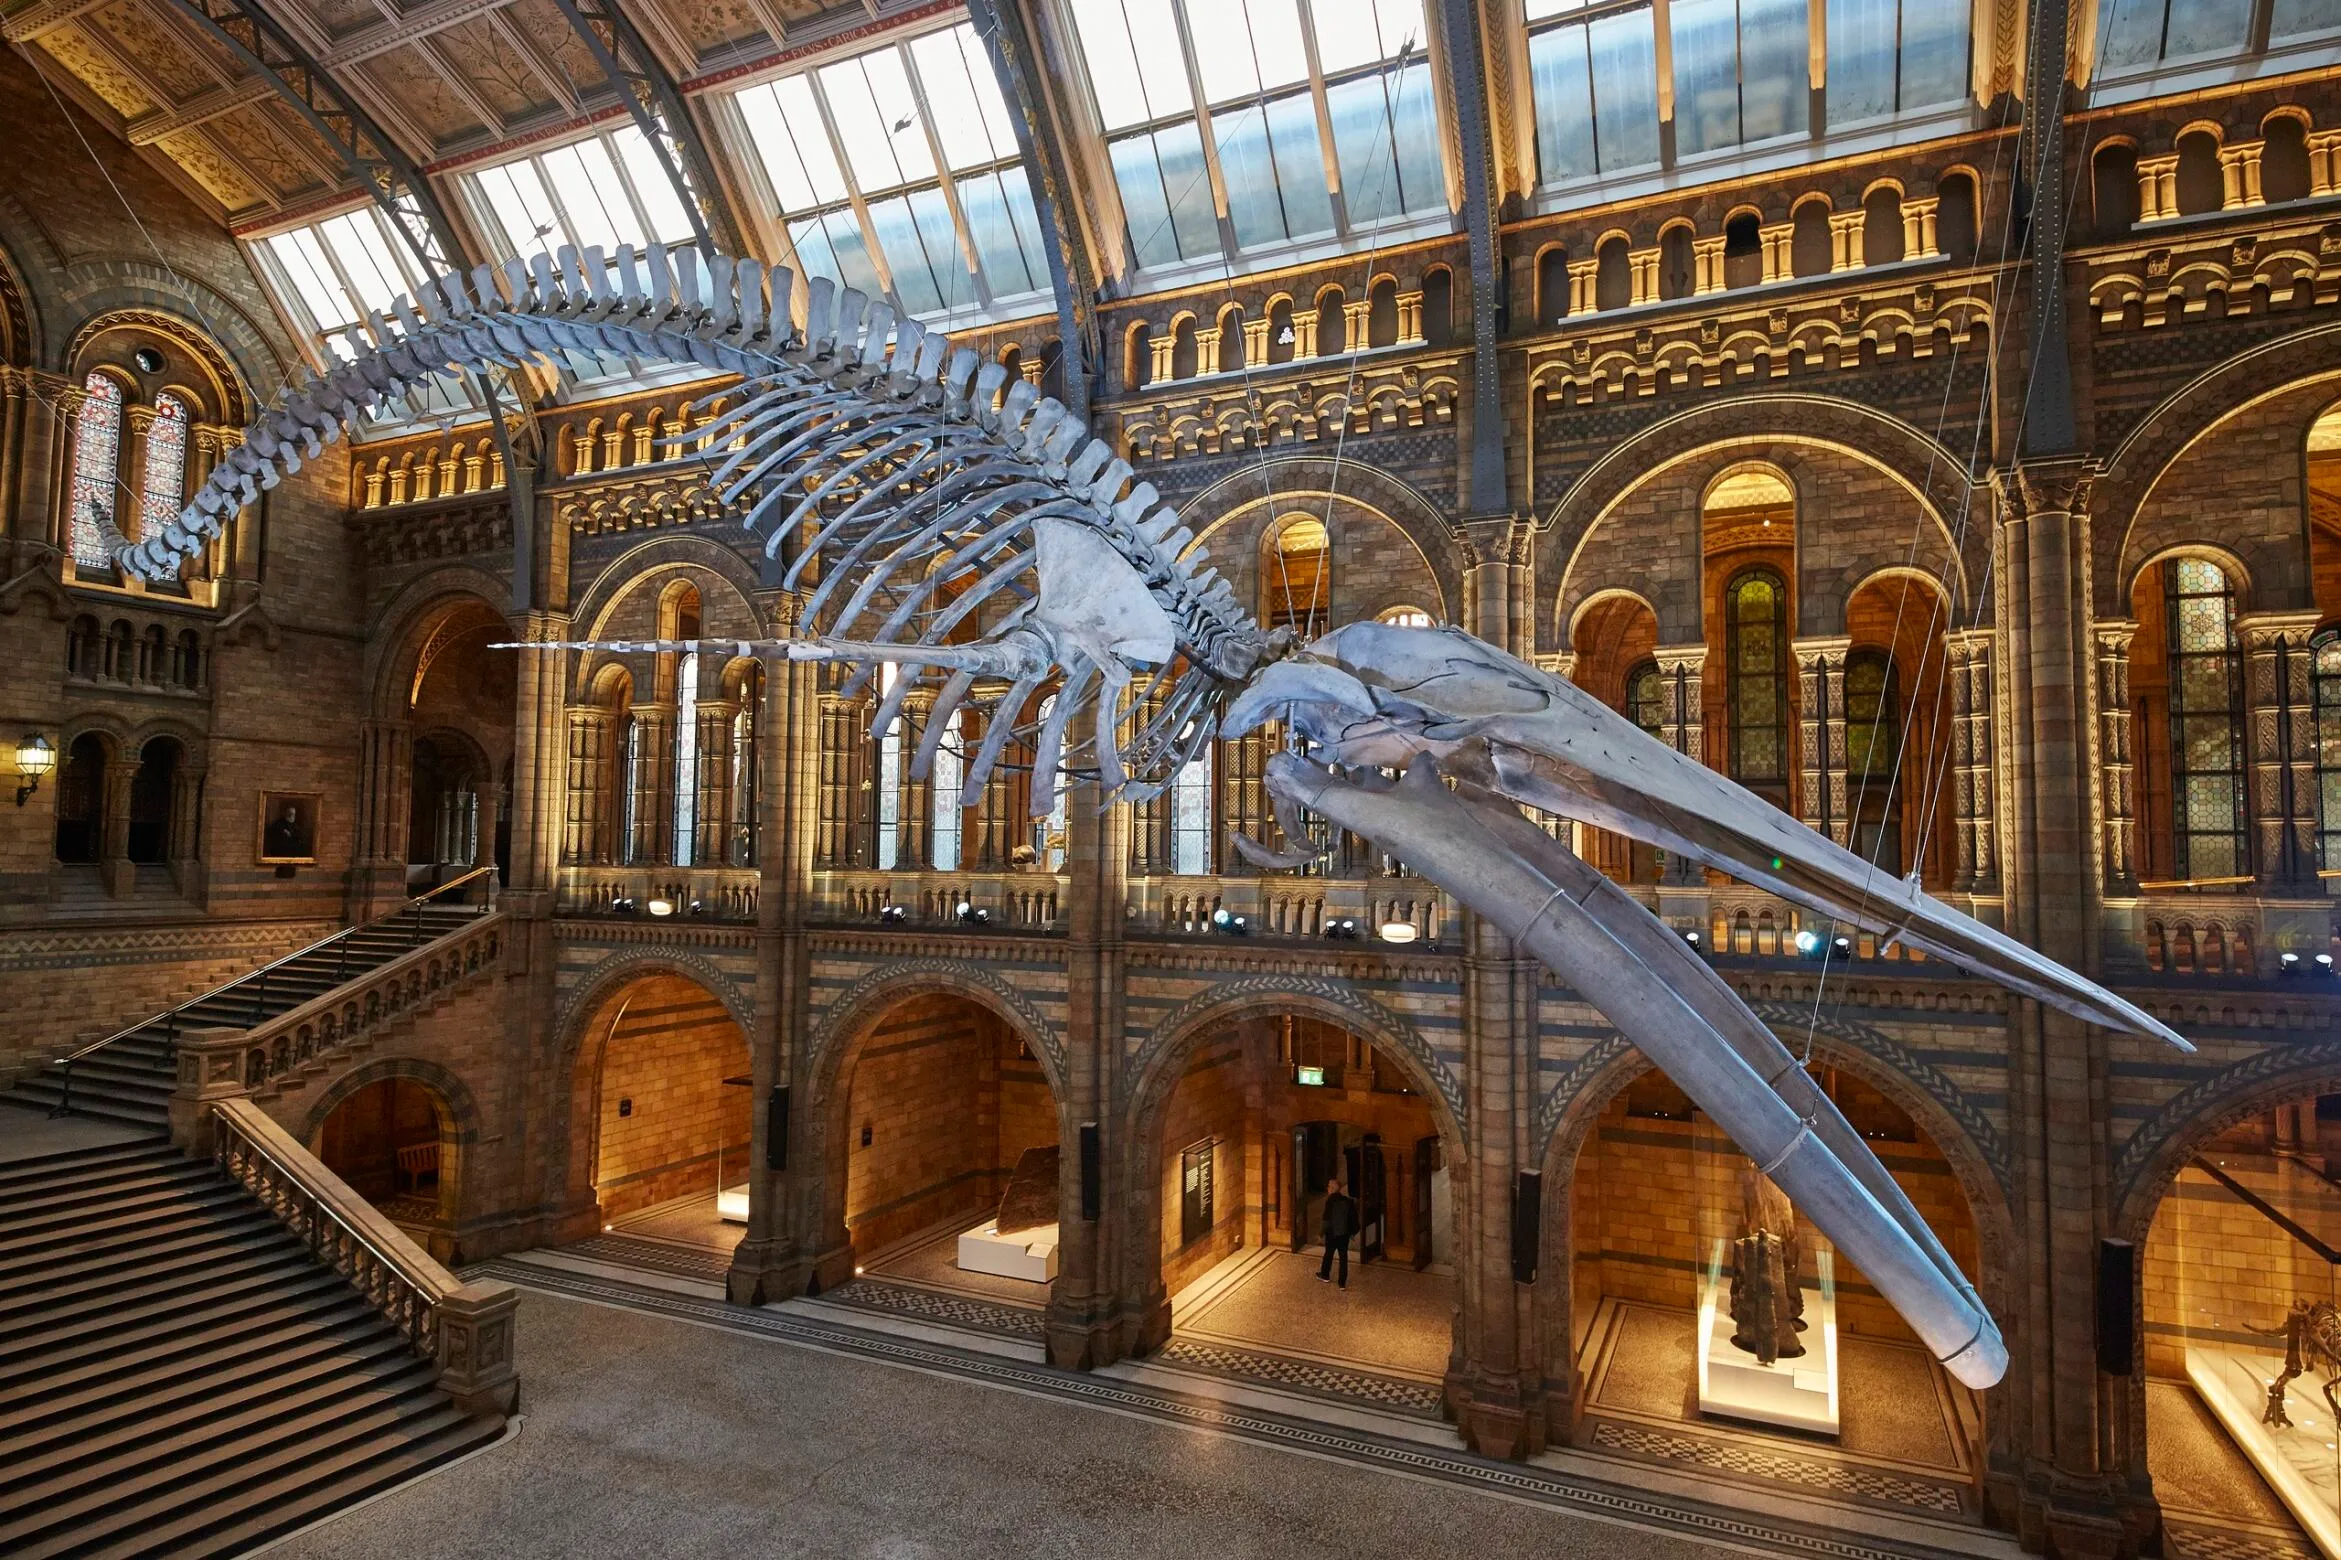 Blue Whale skeleton hanging in Hintze Hall at the Natural History Museum.